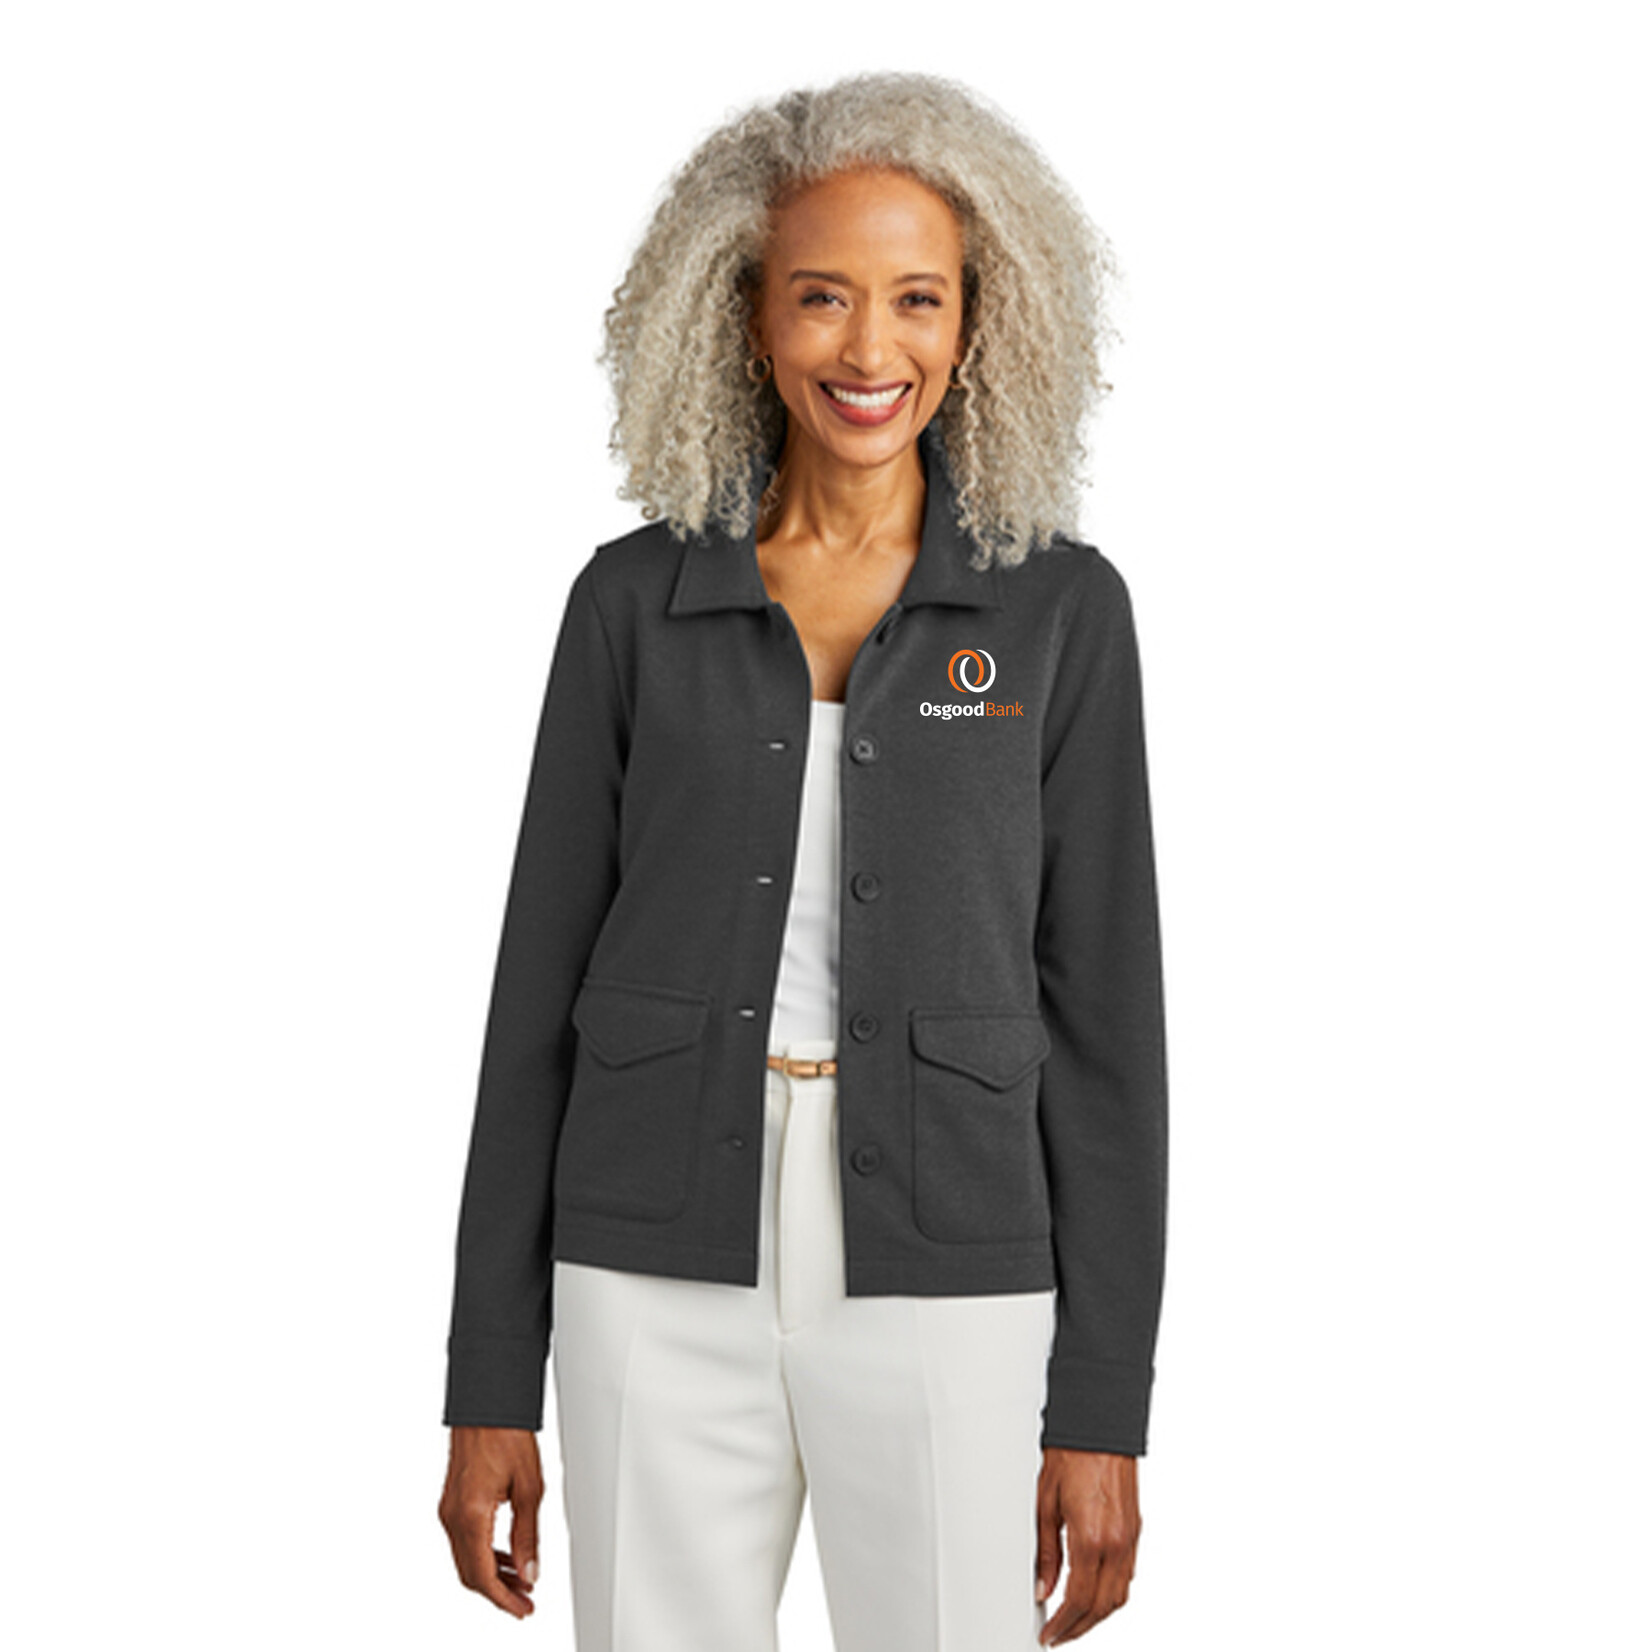 OB - Brooks Brothers Women’s Mid-Layer Stretch Button Jacket BB18205